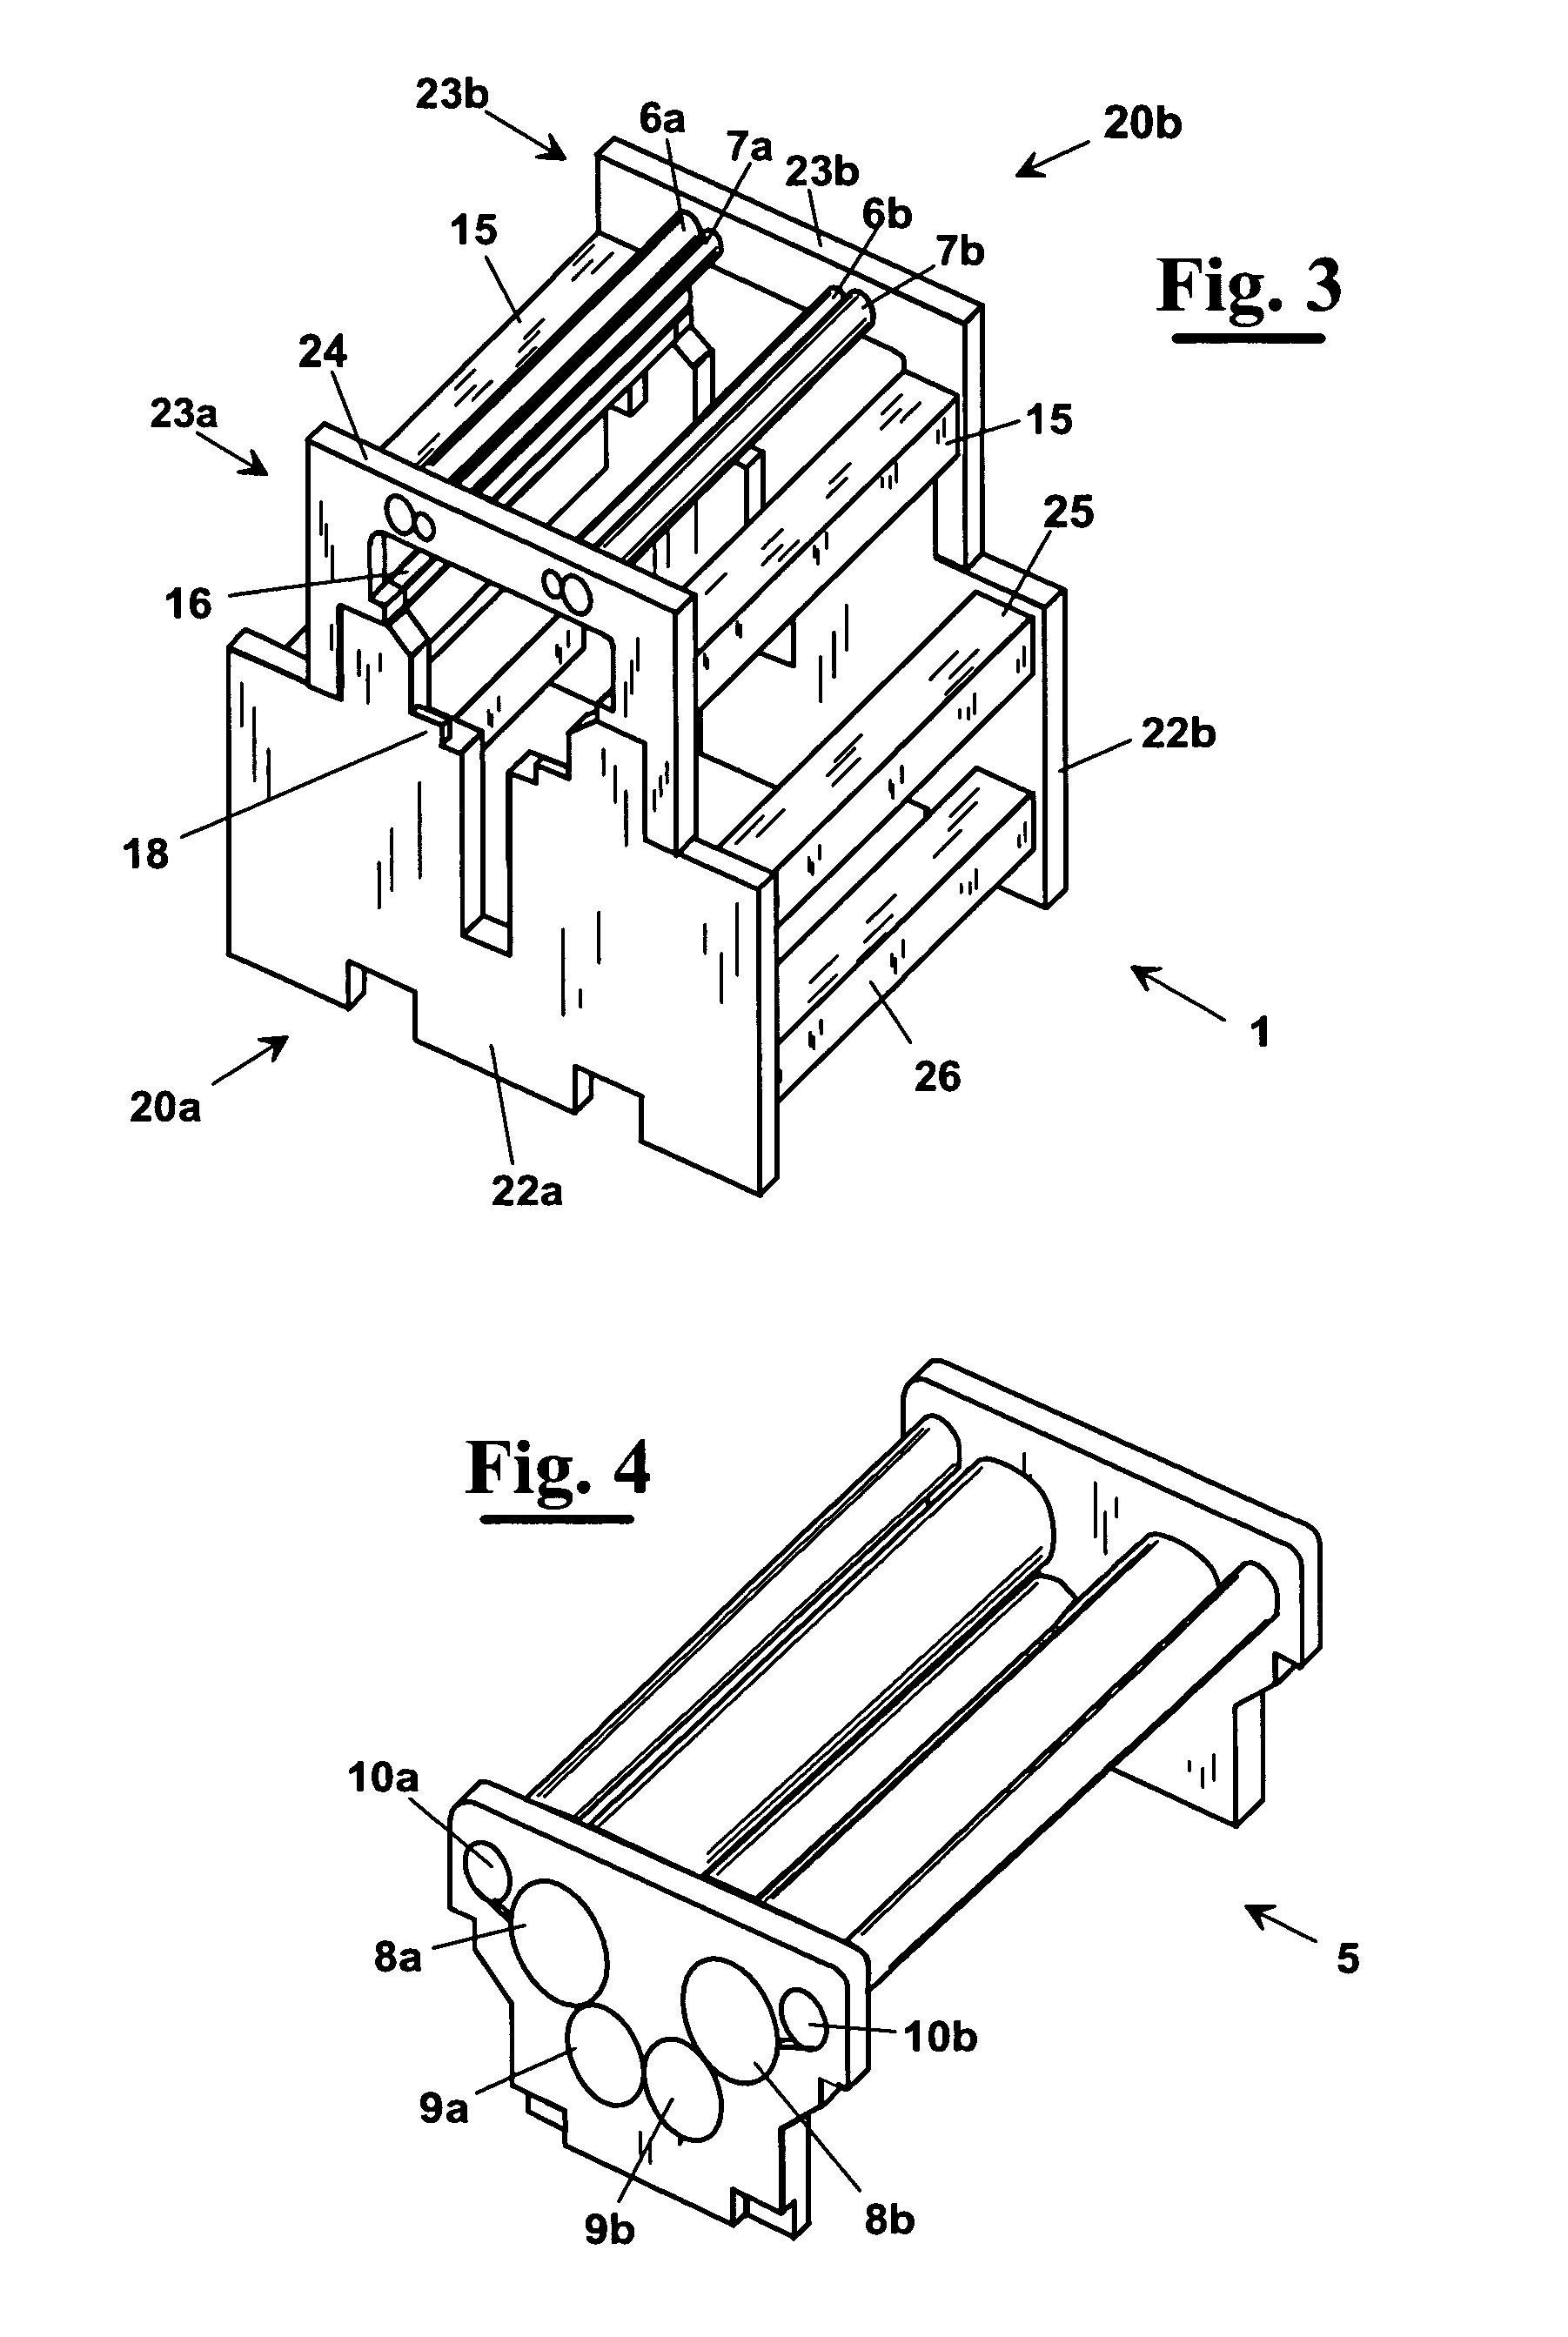 Structure of interfolding machine